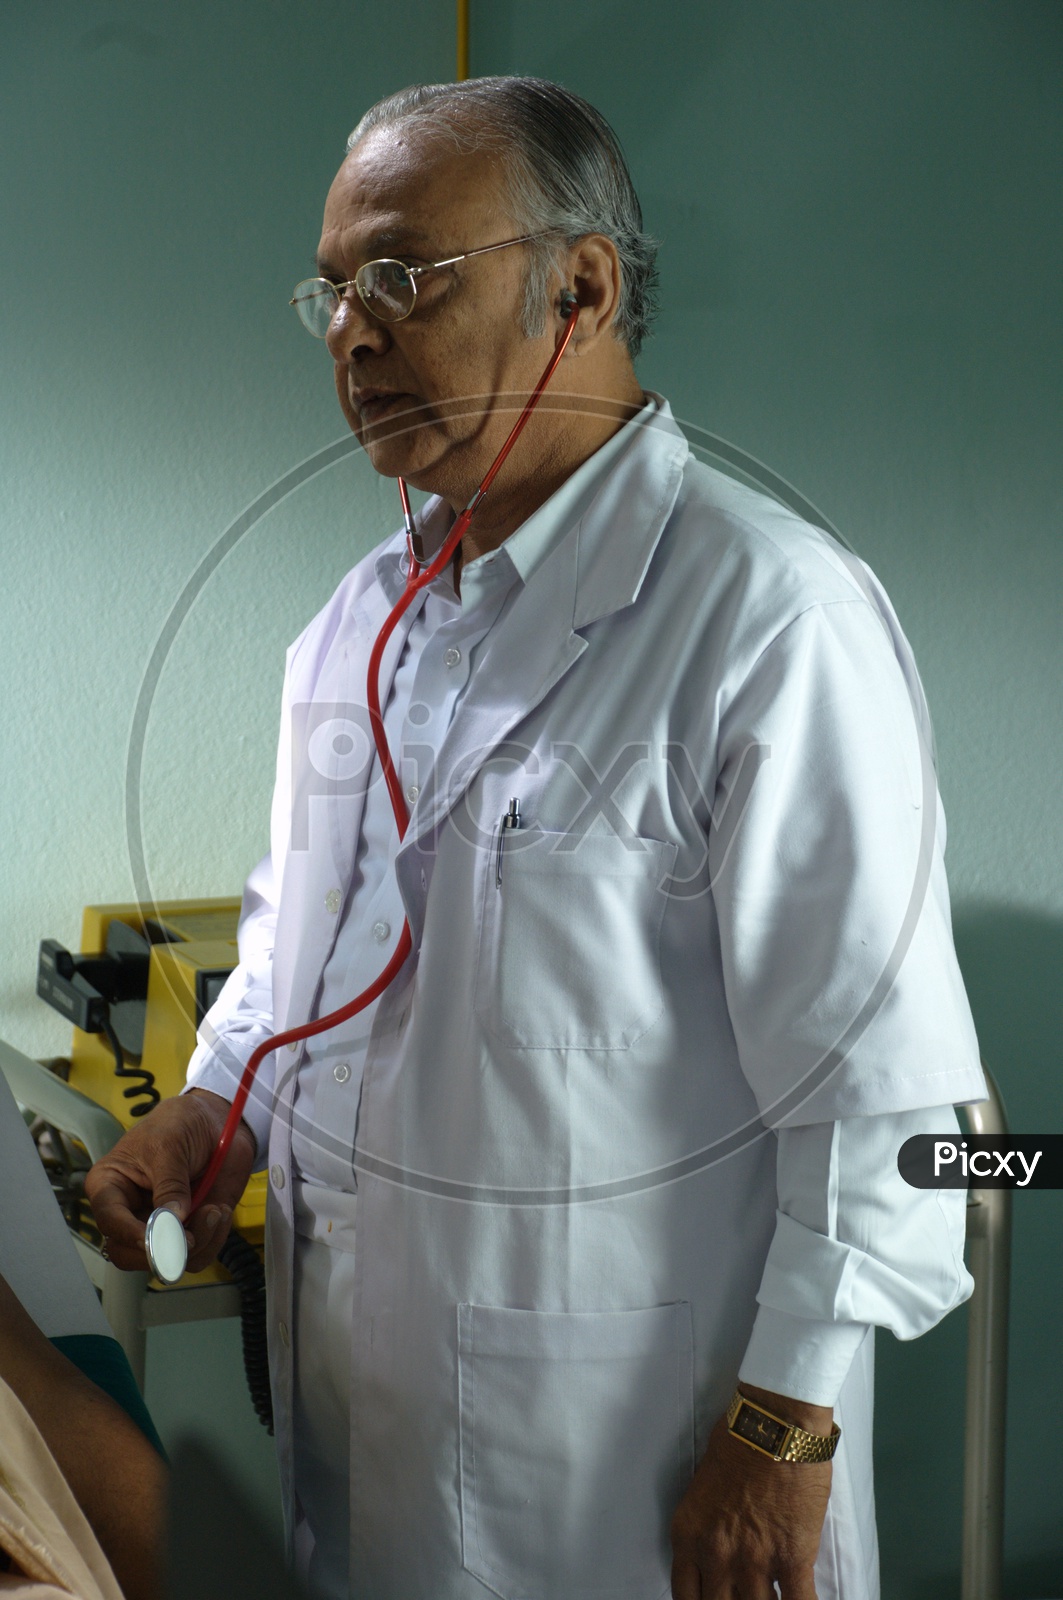 An old male doctor with stethoscope wearing a white coat